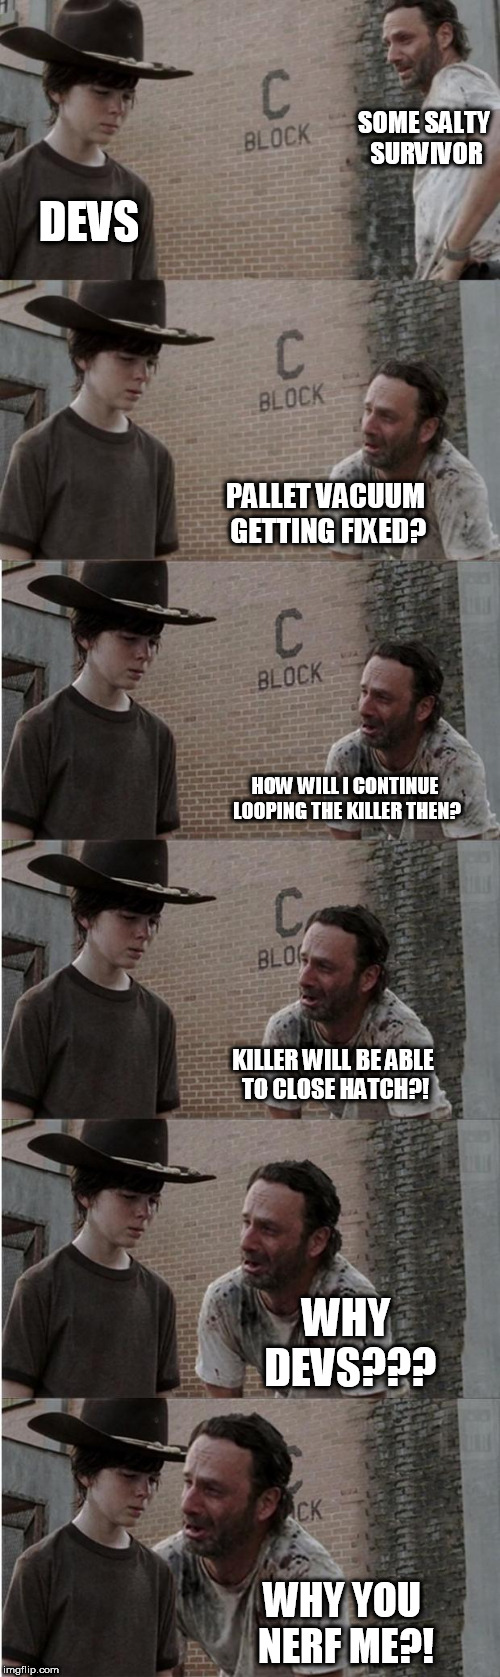 Rick and Carl Longer Meme | SOME SALTY SURVIVOR; DEVS; PALLET VACUUM GETTING FIXED? HOW WILL I CONTINUE LOOPING THE KILLER THEN? KILLER WILL BE ABLE TO CLOSE HATCH?! WHY DEVS??? WHY YOU NERF ME?! | image tagged in memes,rick and carl longer | made w/ Imgflip meme maker